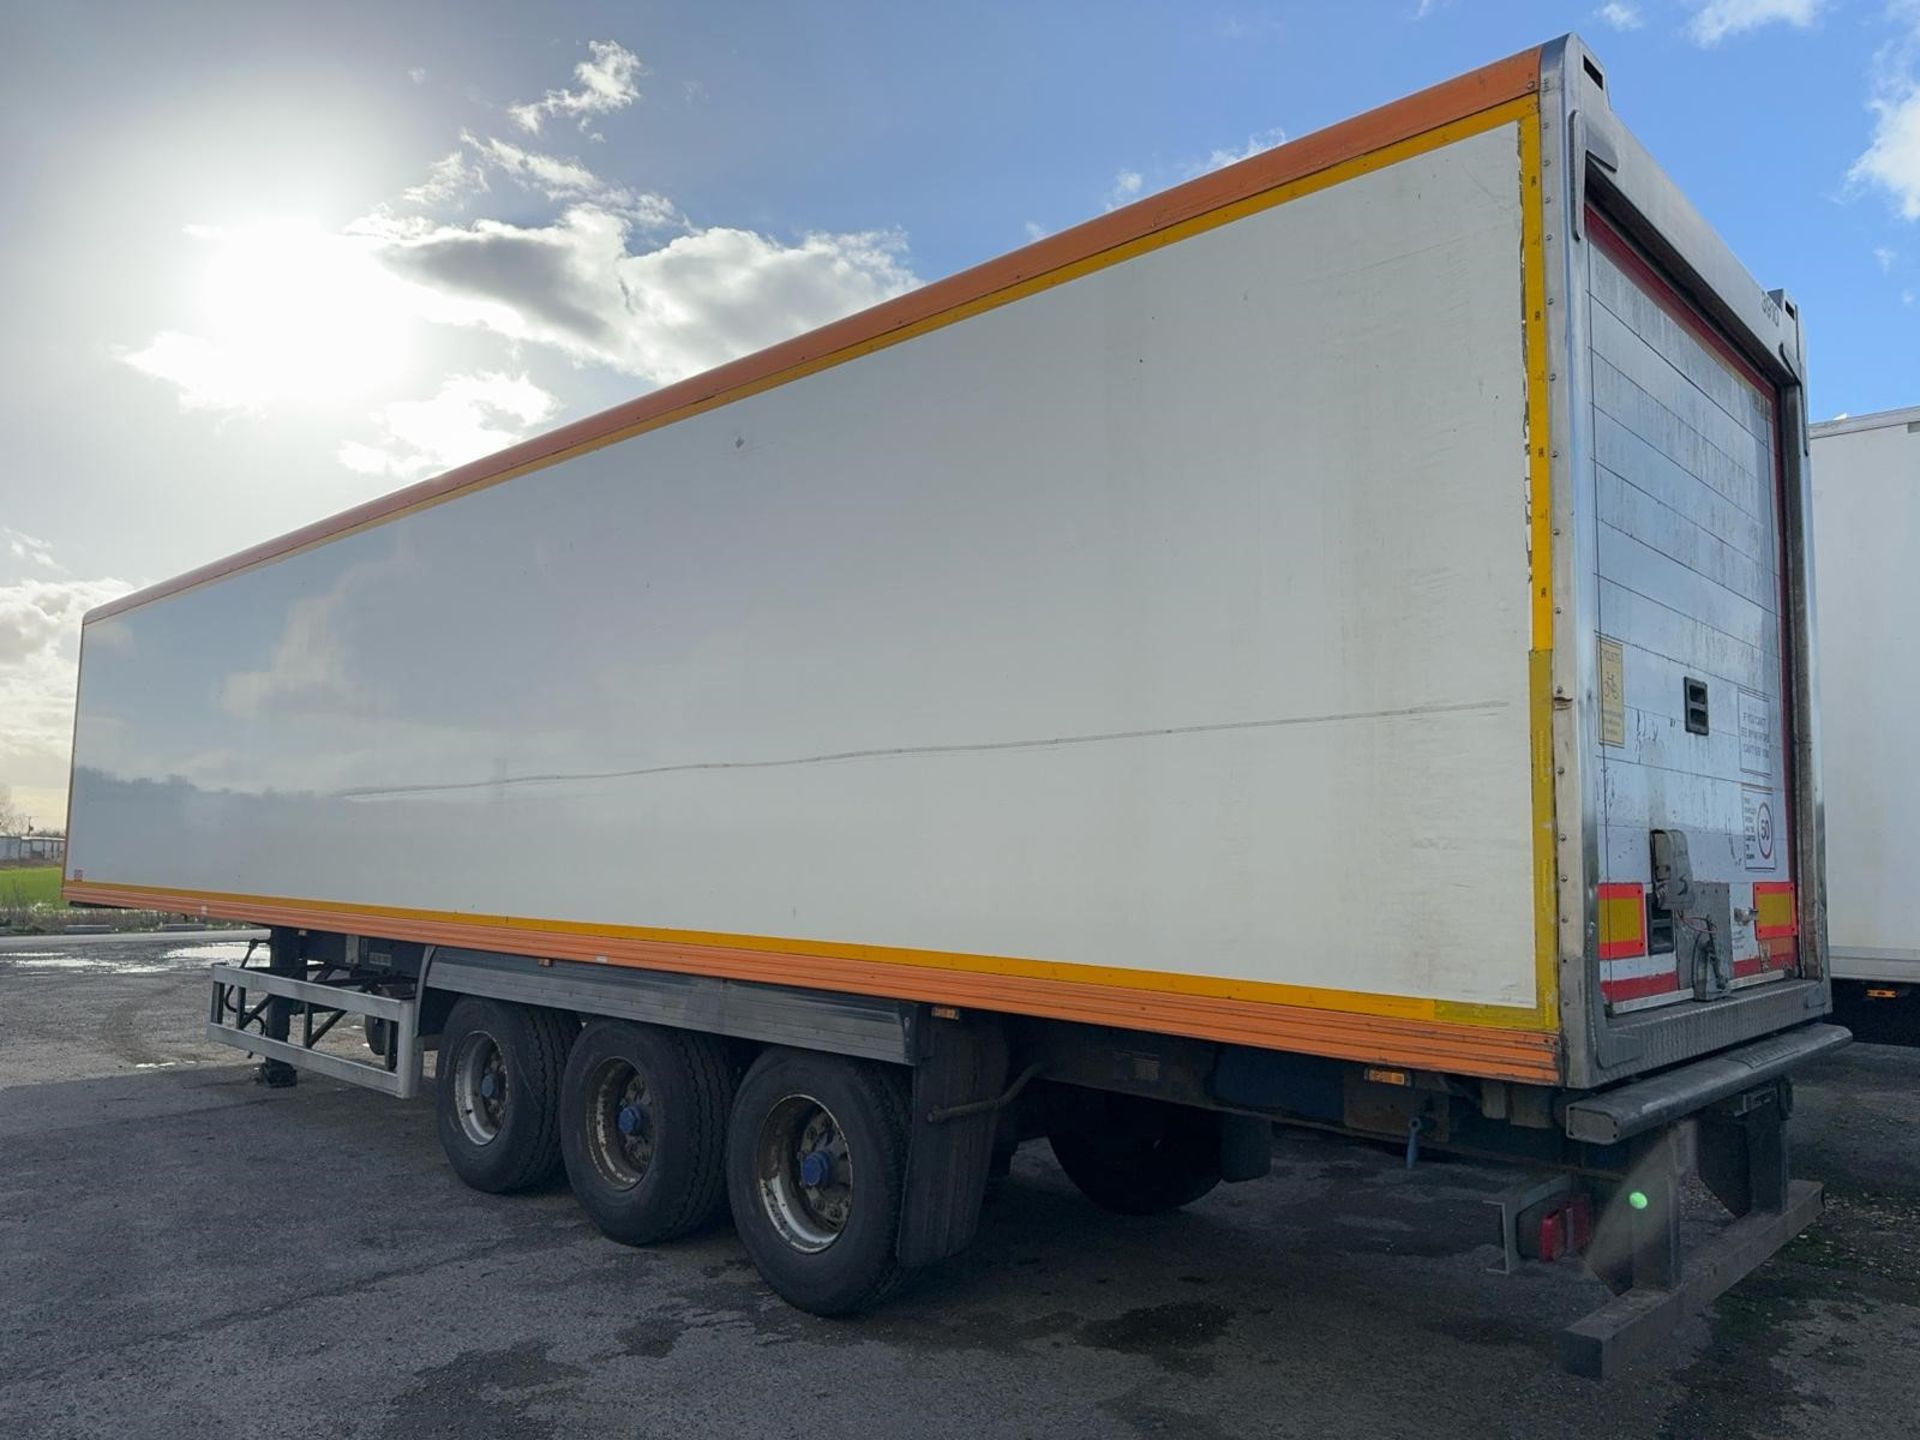 3910 - 2010 Montracon 13.6 Refrigerated Multi-Temp Trailer - Image 10 of 13